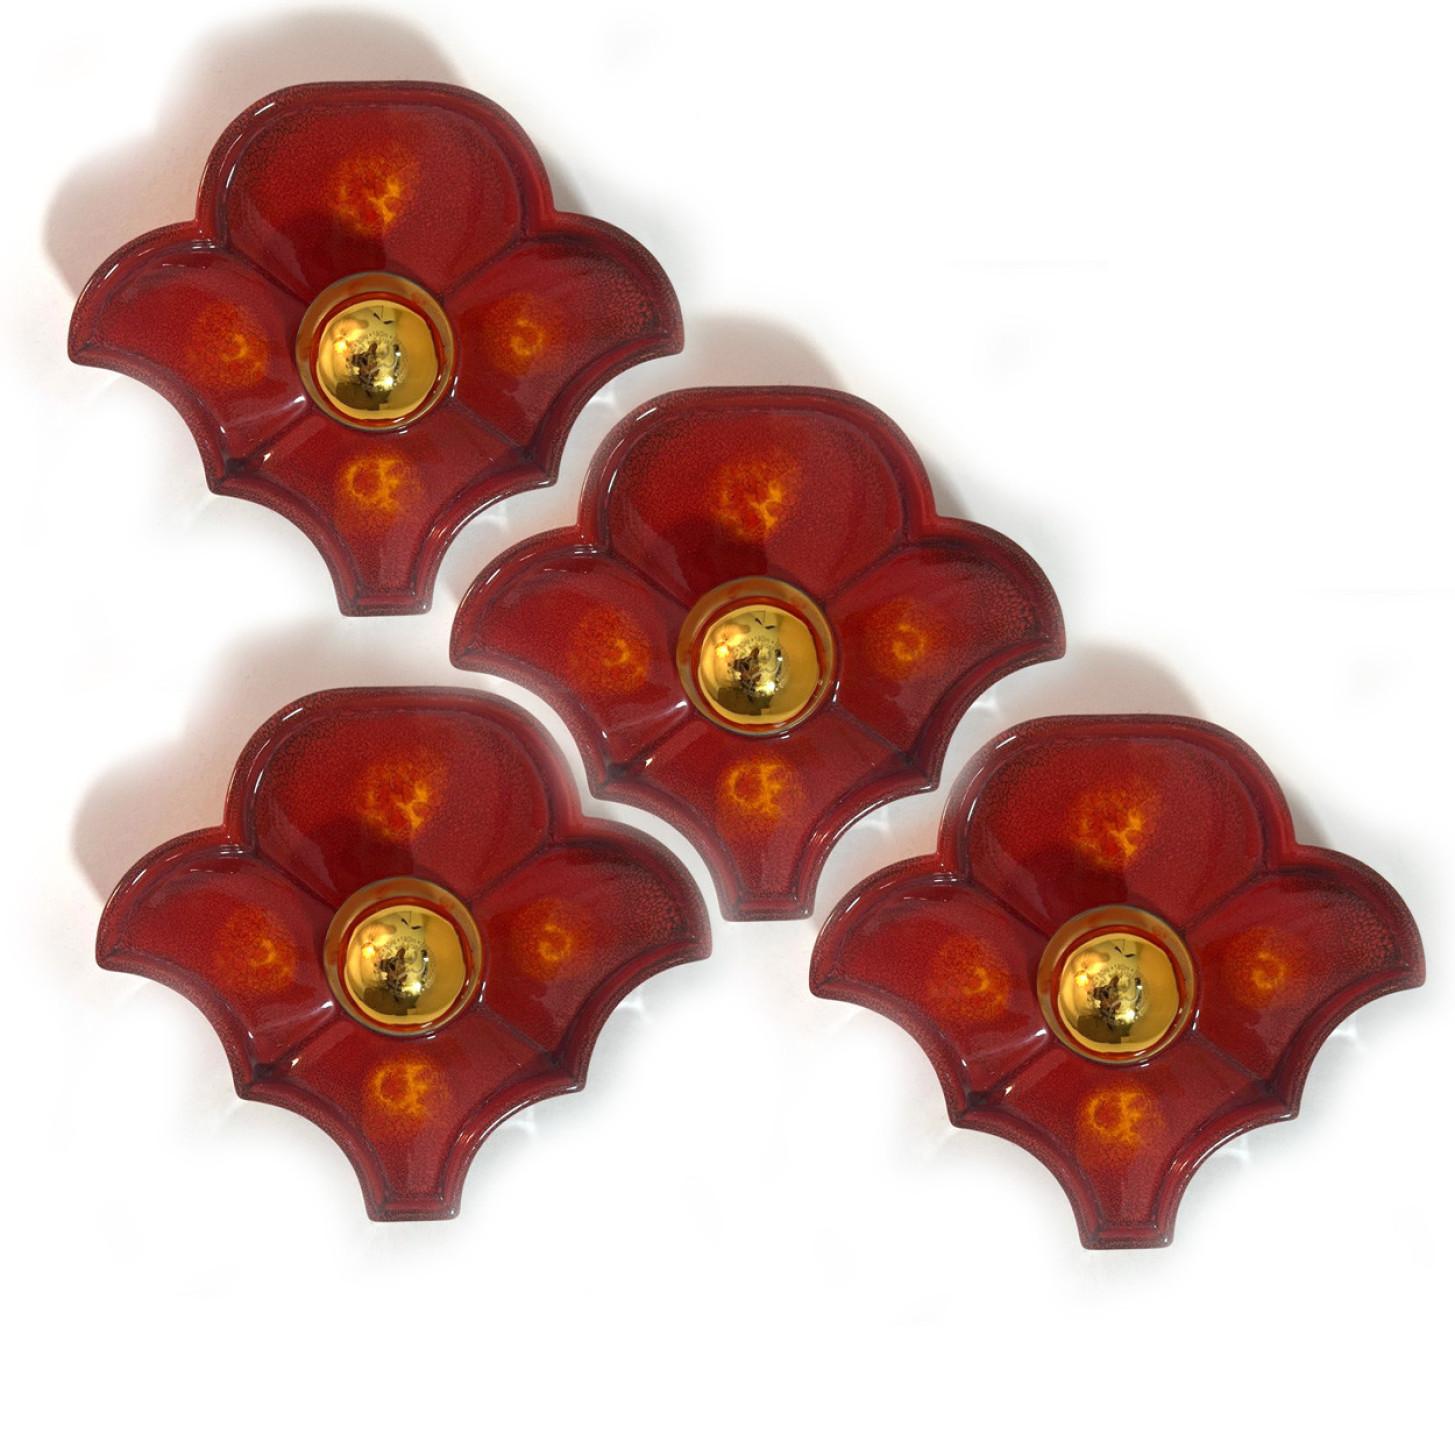 Red ceramic wall lights. Manufactured by Hustadt Leuchten Keramik, Germany in the 1970s.

The glaze is red coloured in a flower shape.

We used gold mirror light bulbs (see images), but silver mirror or soft gold light bulbs are also very